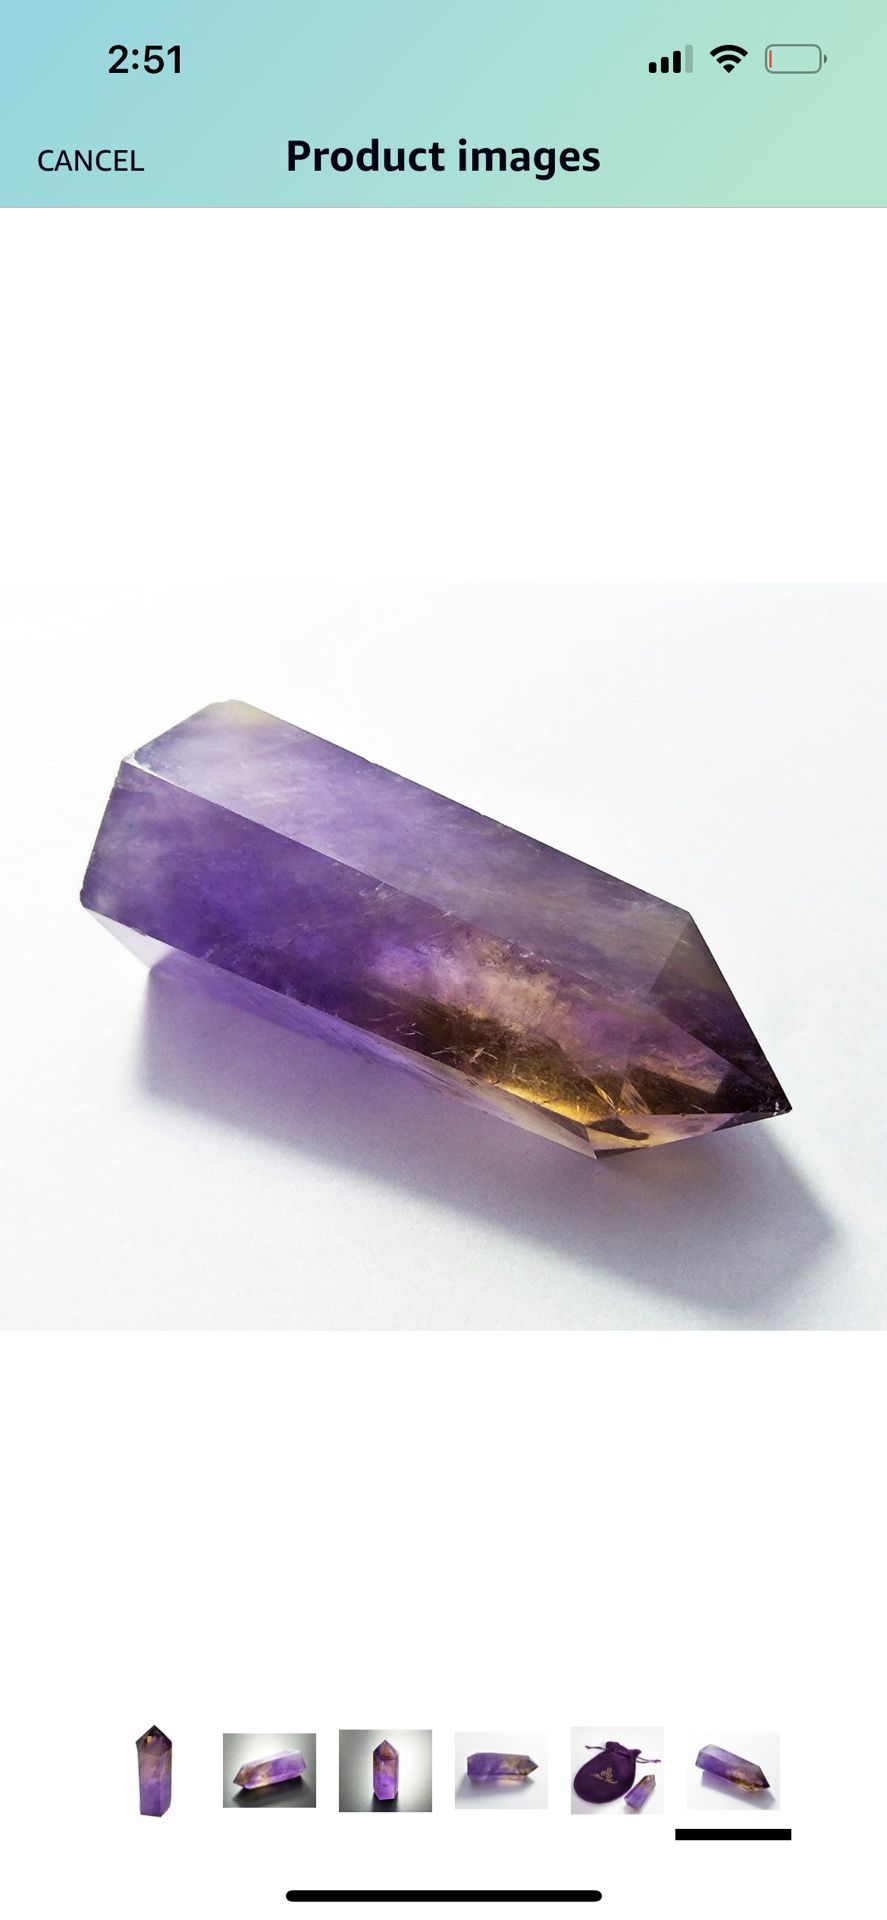 Amethyst Healing Crystal Wand Pointed & Faceted Prism Bar for Reiki Chakra Meditation Therapy Deco, Small gemstomes are Gifts (Colors May Vary Due Nat